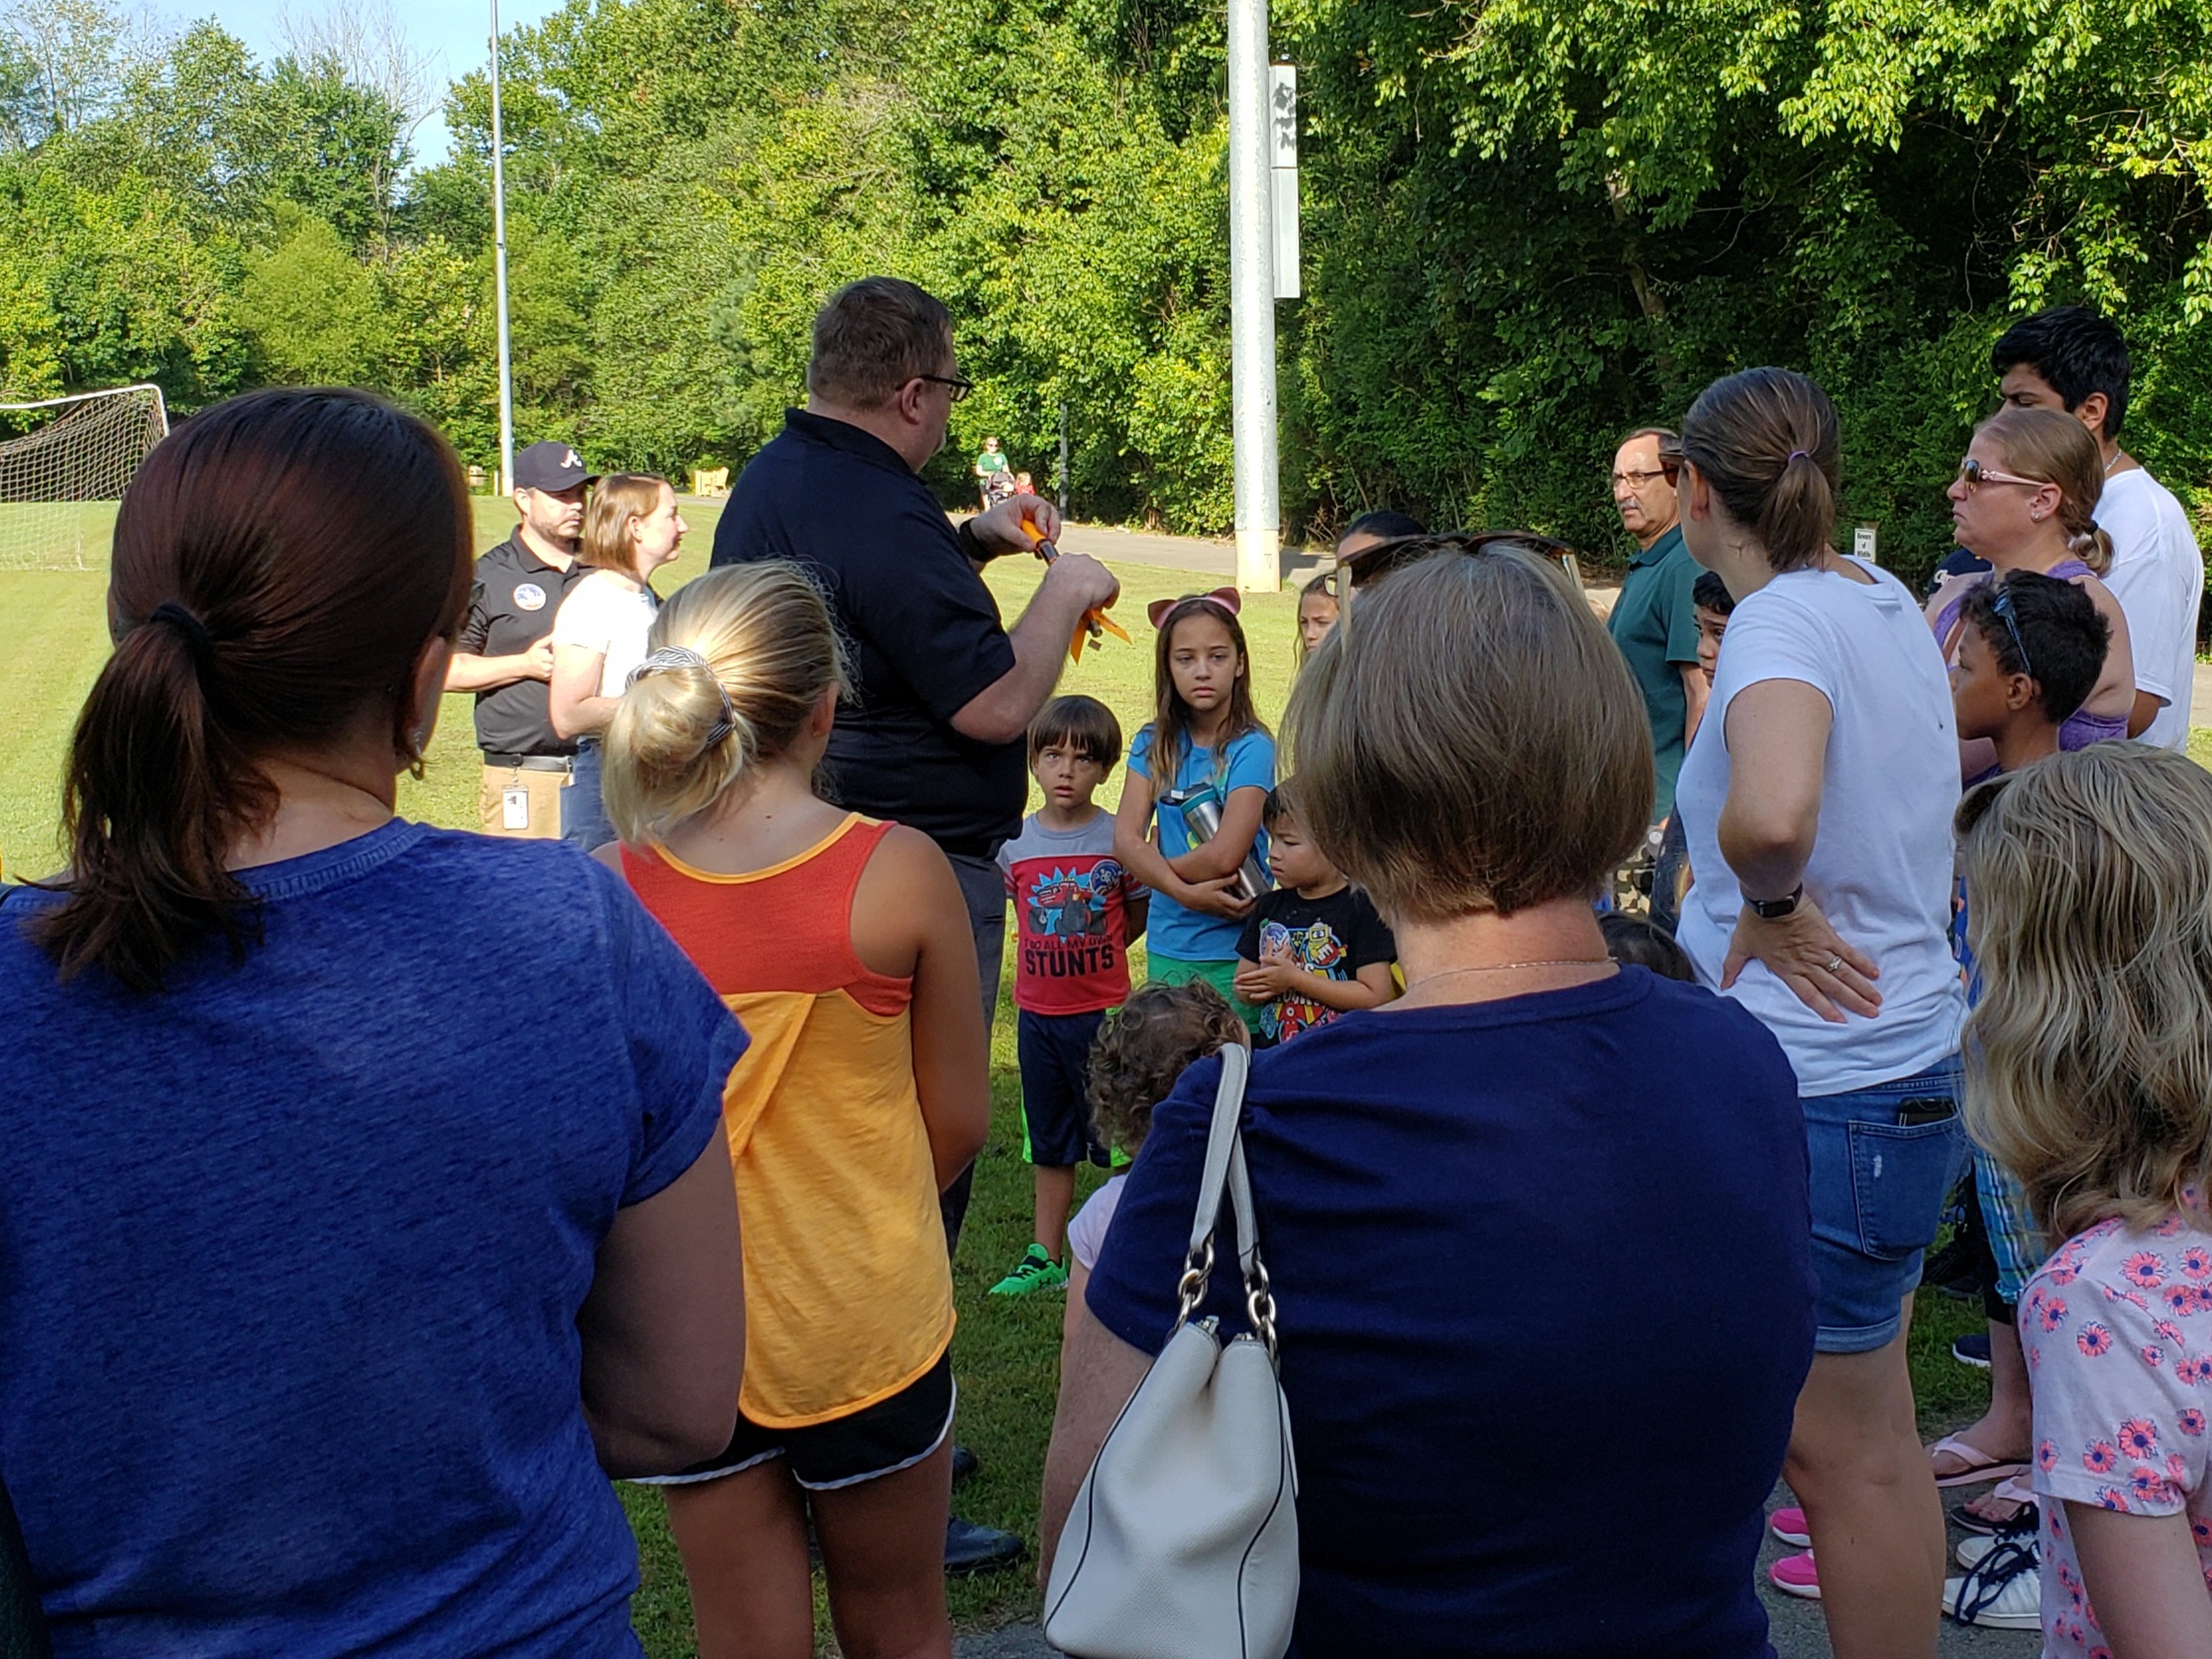 Maj. Johnston helps students with a rocket launch in Sugar Hill, Georgia as students and parents look on